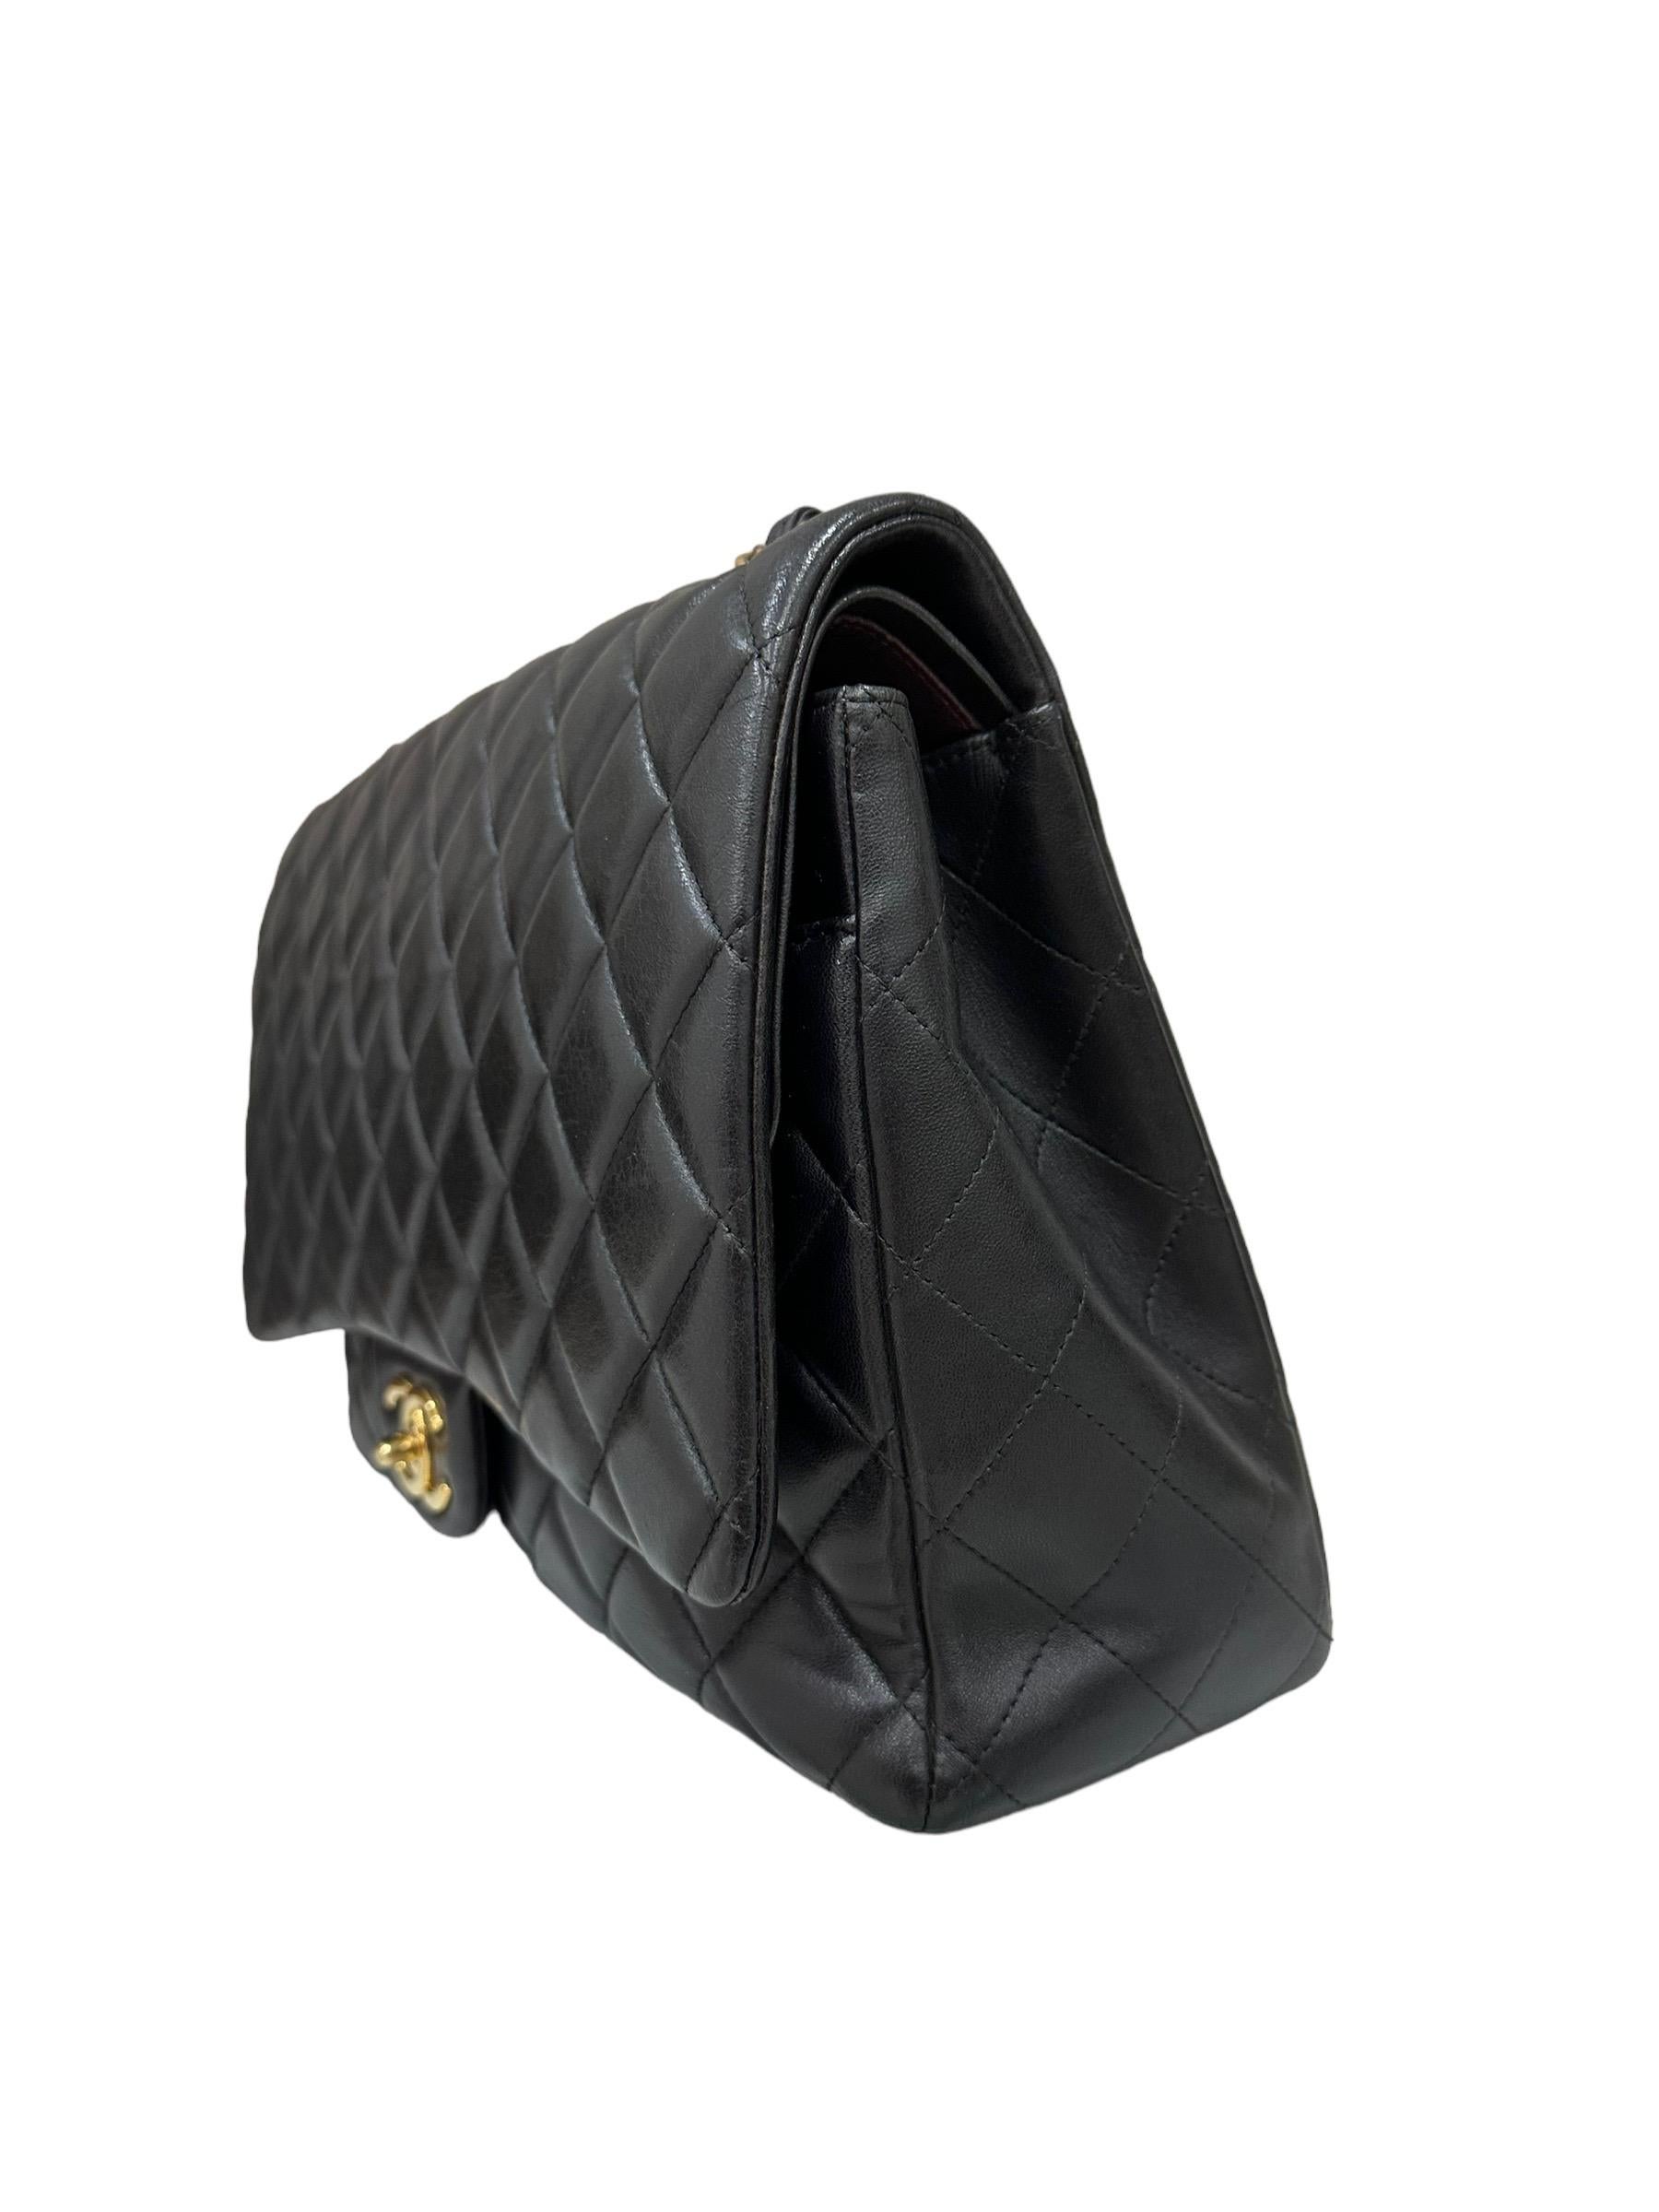 2011 Chanel Timeless Maxi Jumbo Black Leather Top Shoulder Bag In Good Condition For Sale In Torre Del Greco, IT